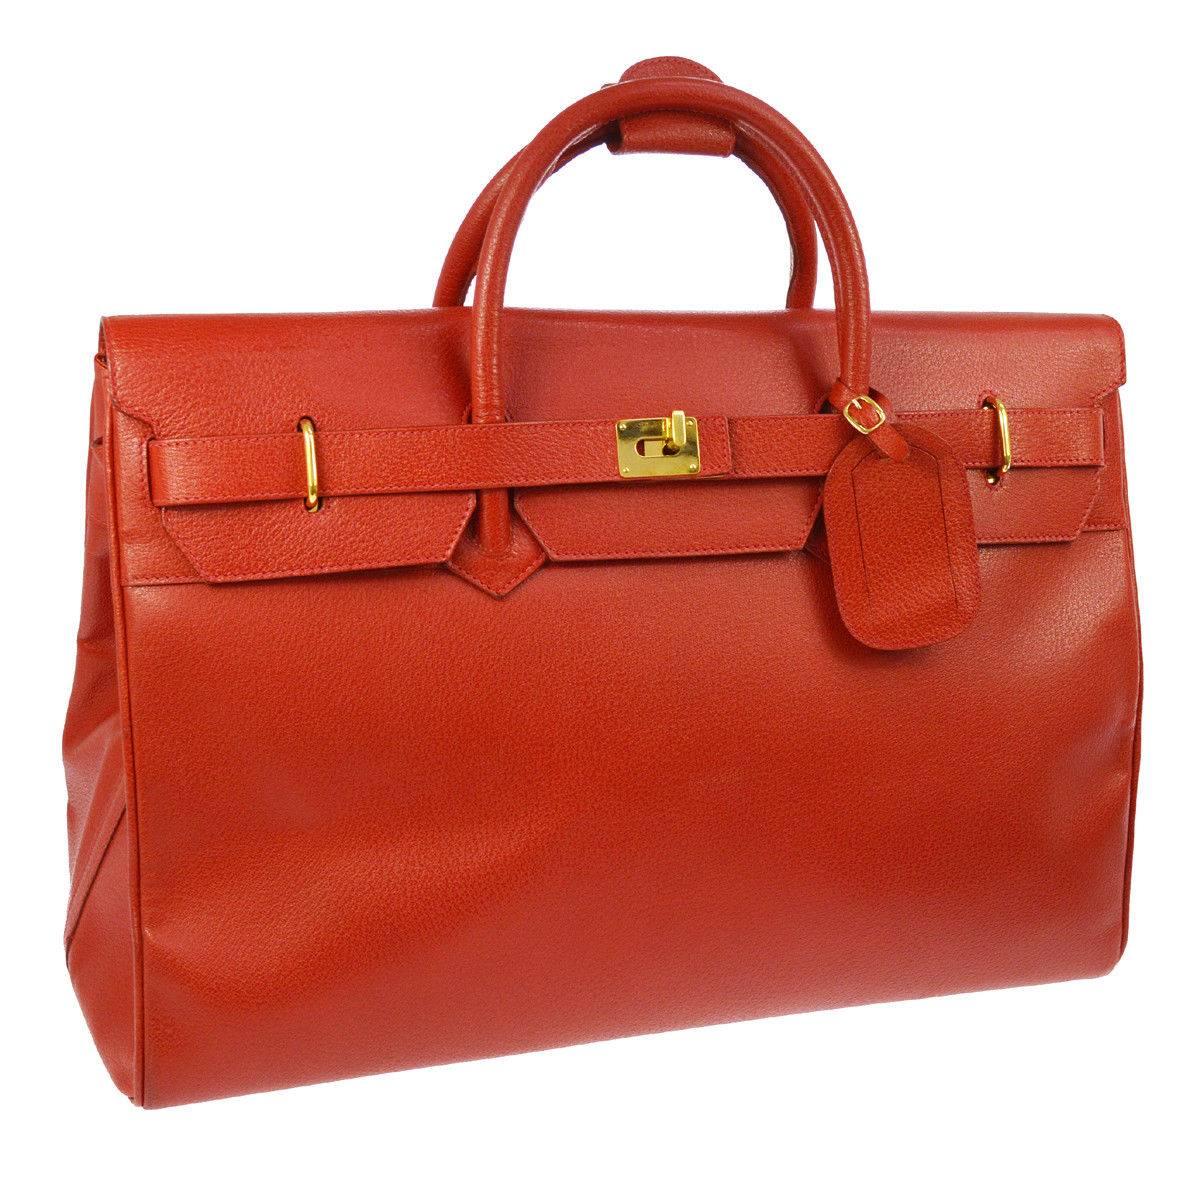 Gucci Red Leather Gold Men's Travel Weekender Top Handle Tote Bag